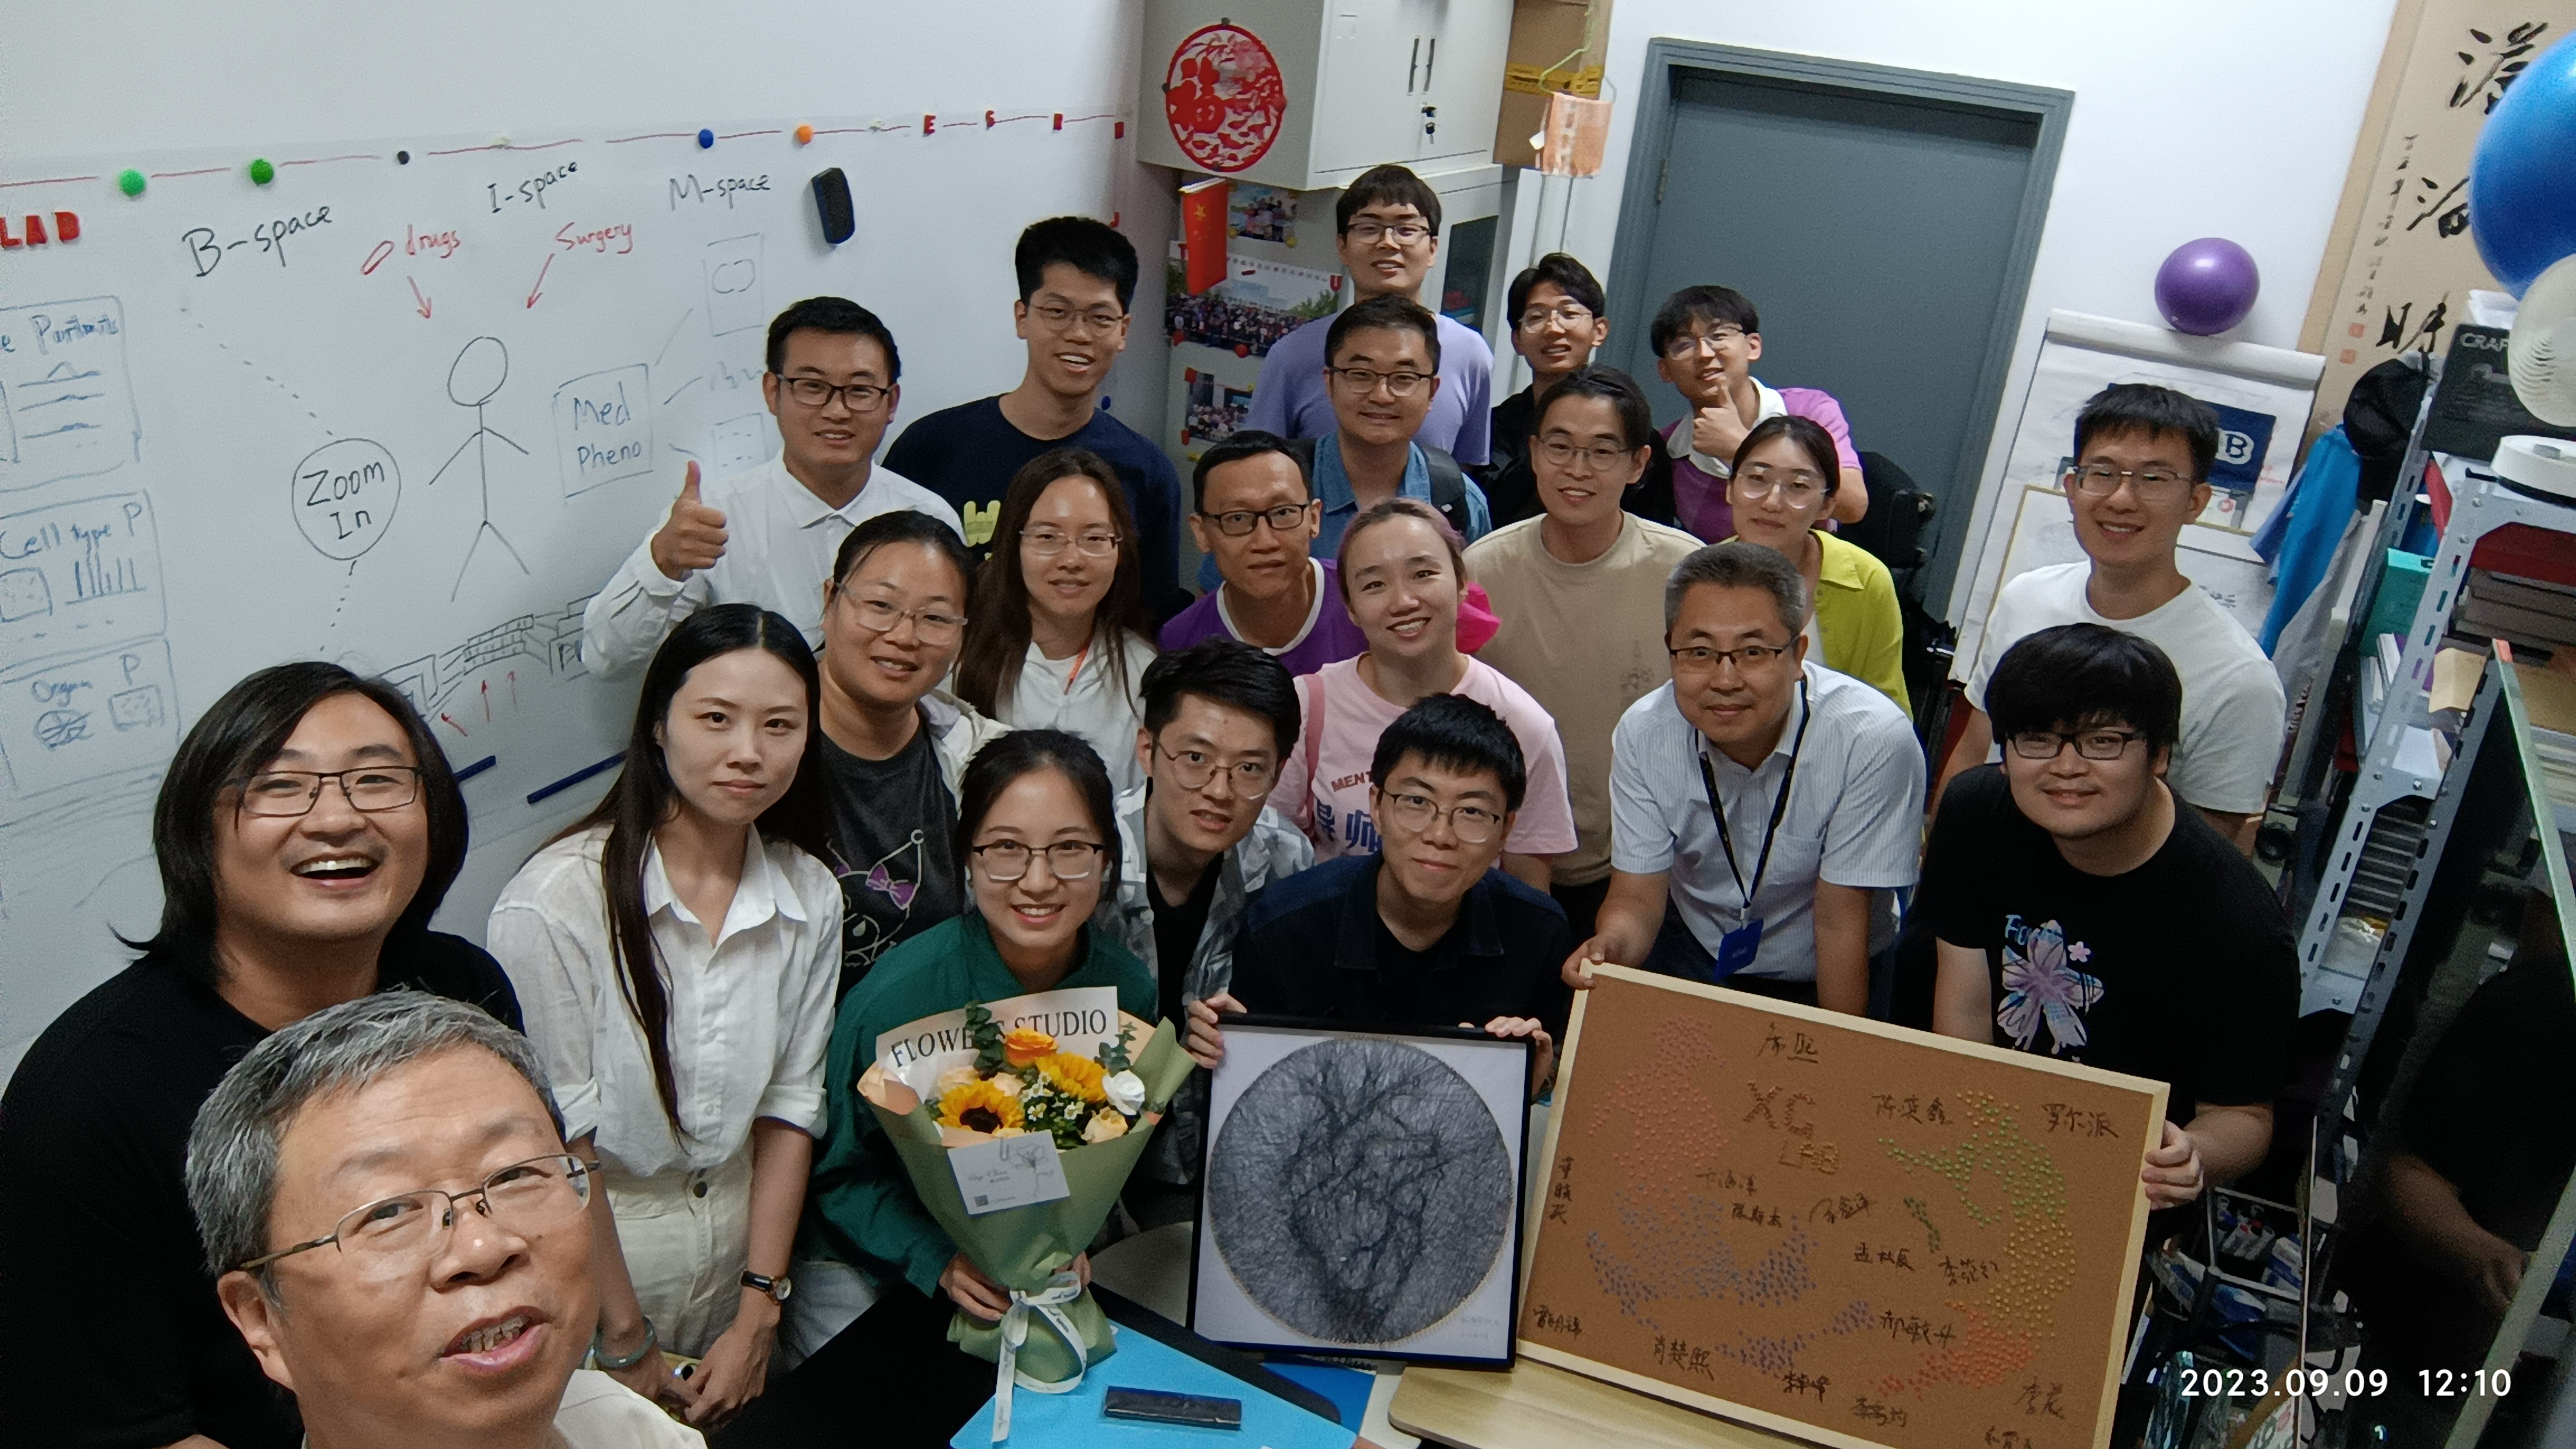 The photo of Xuegong lab